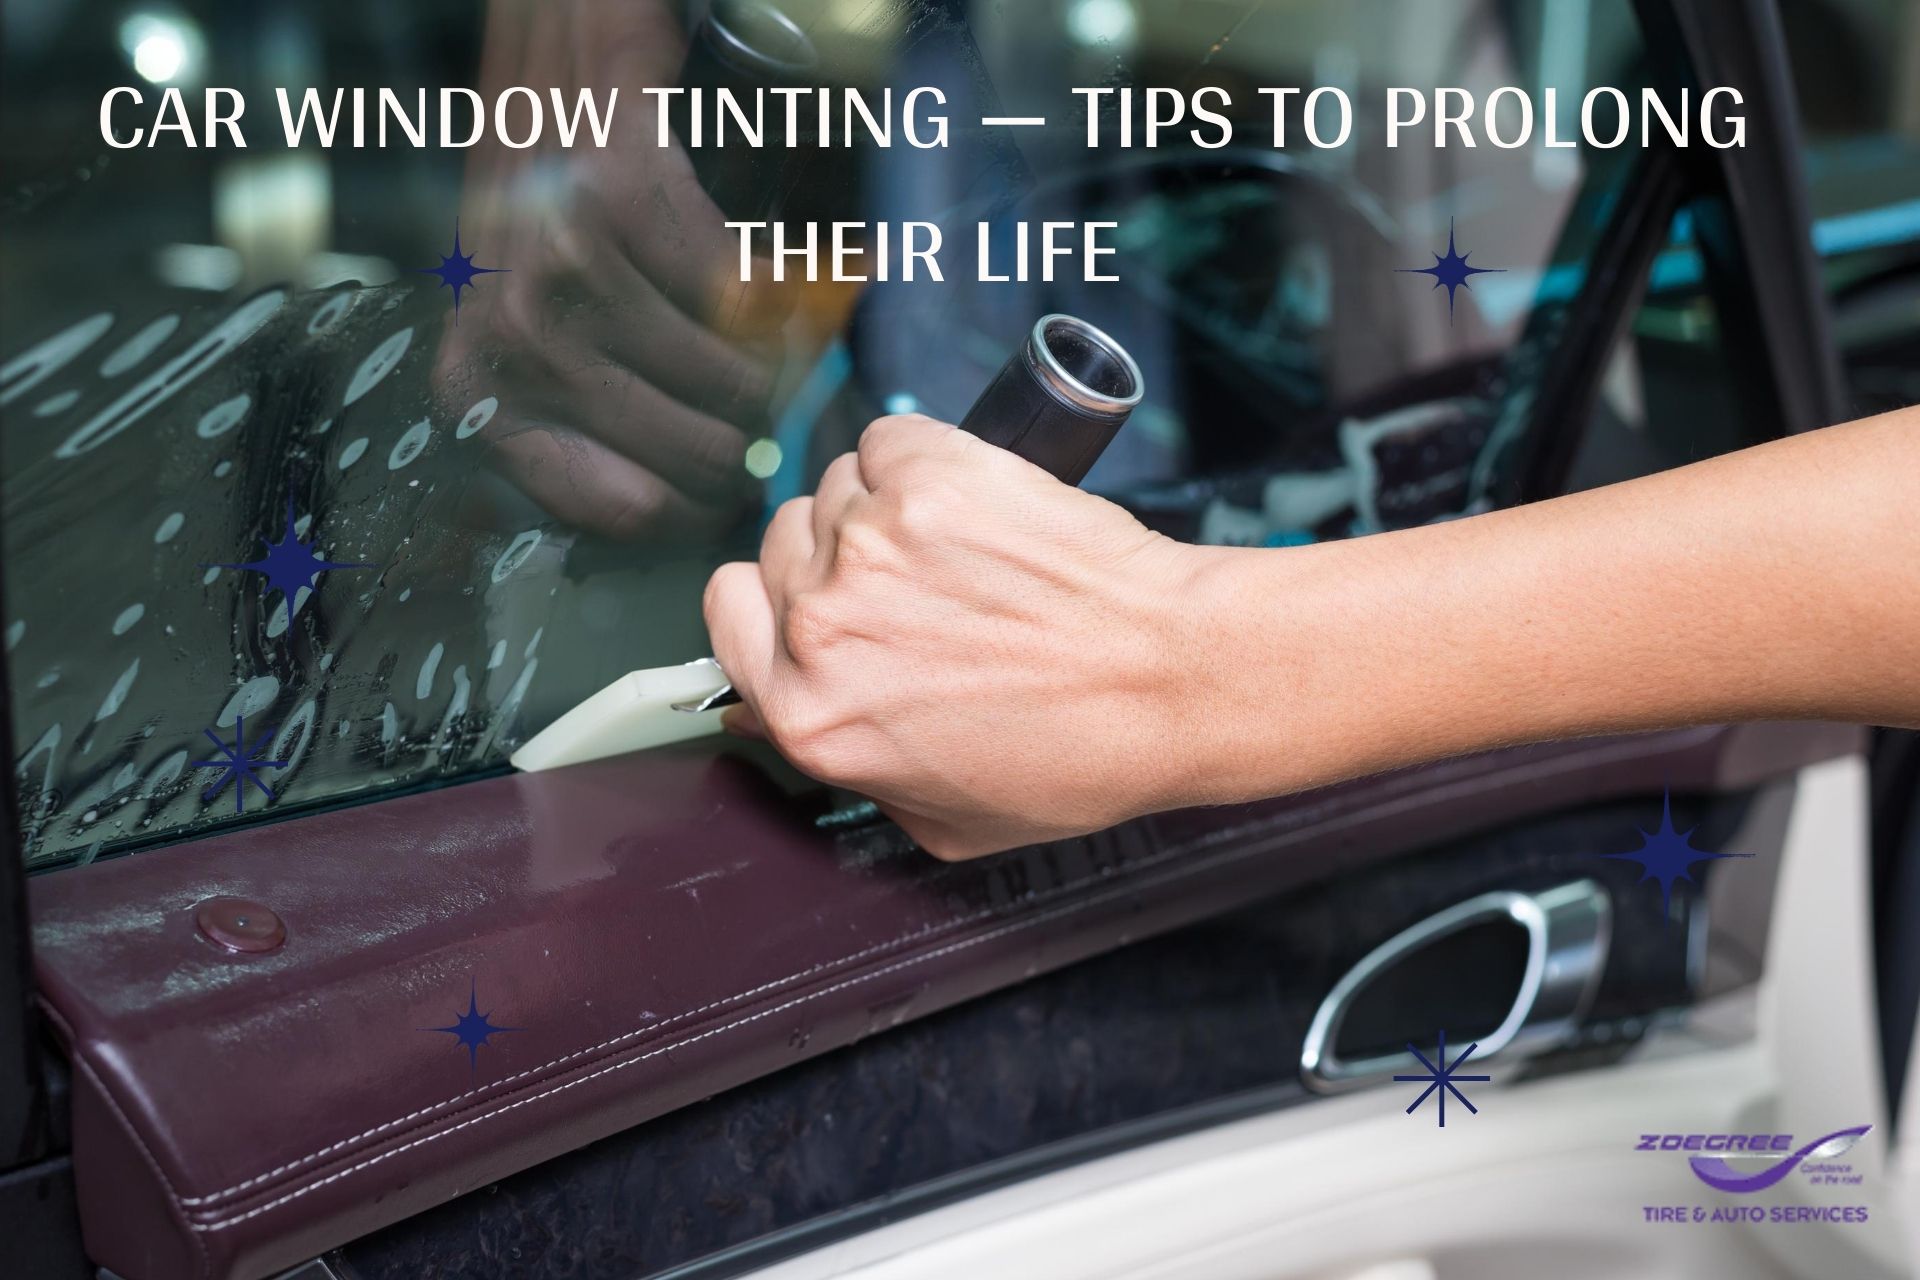 CAR WINDOW TINTING — TIPS TO PROLONG THEIR LIFE